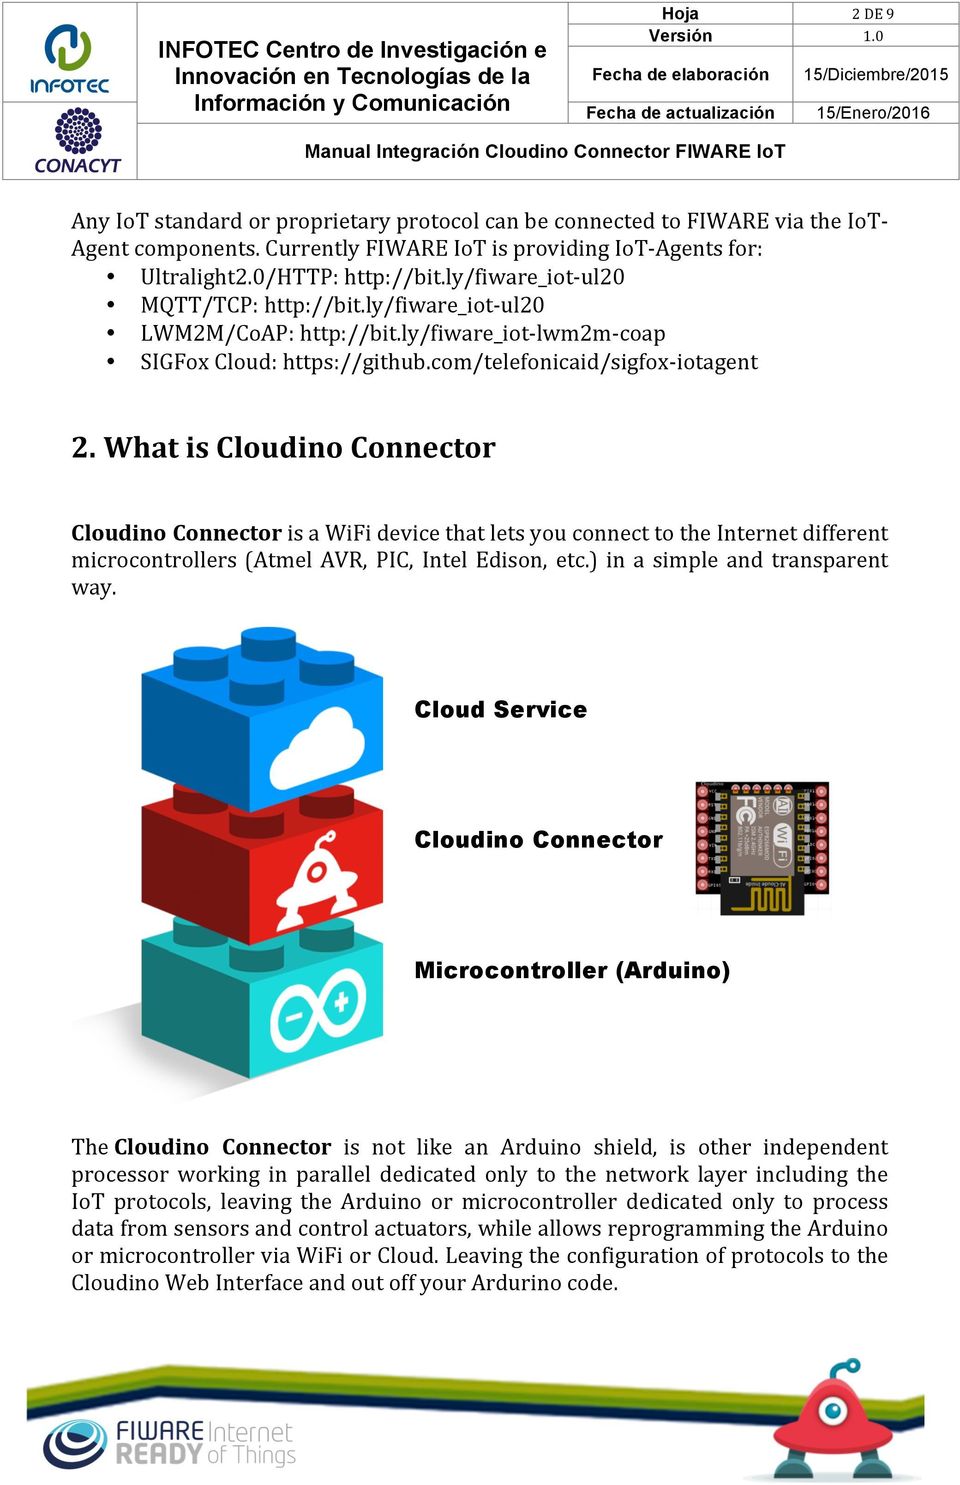 What is Cloudino Connector Cloudino Connector is a WiFi device that lets you connect to the Internet different microcontrollers (Atmel AVR, PIC, Intel Edison, etc.) in a simple and transparent way.